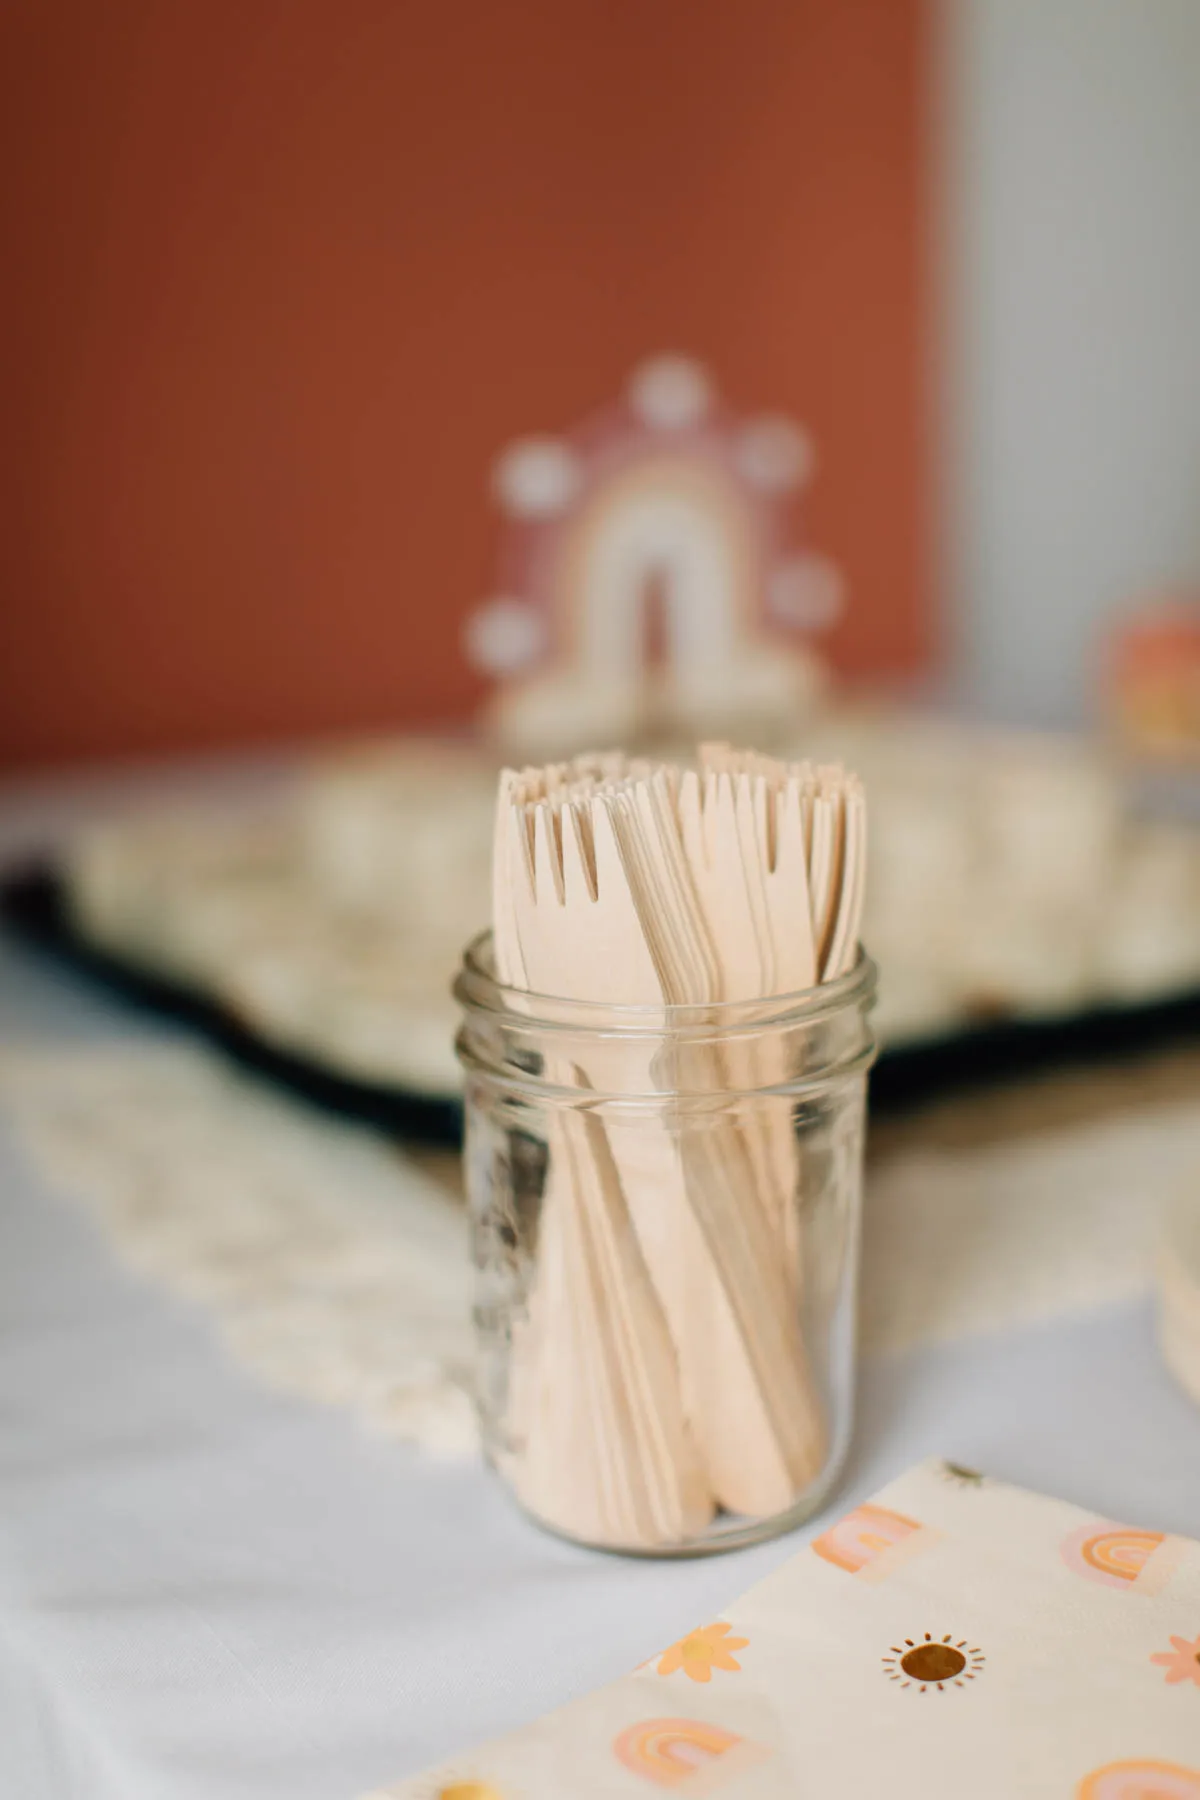 Wood forks in glass mason jar on food table.